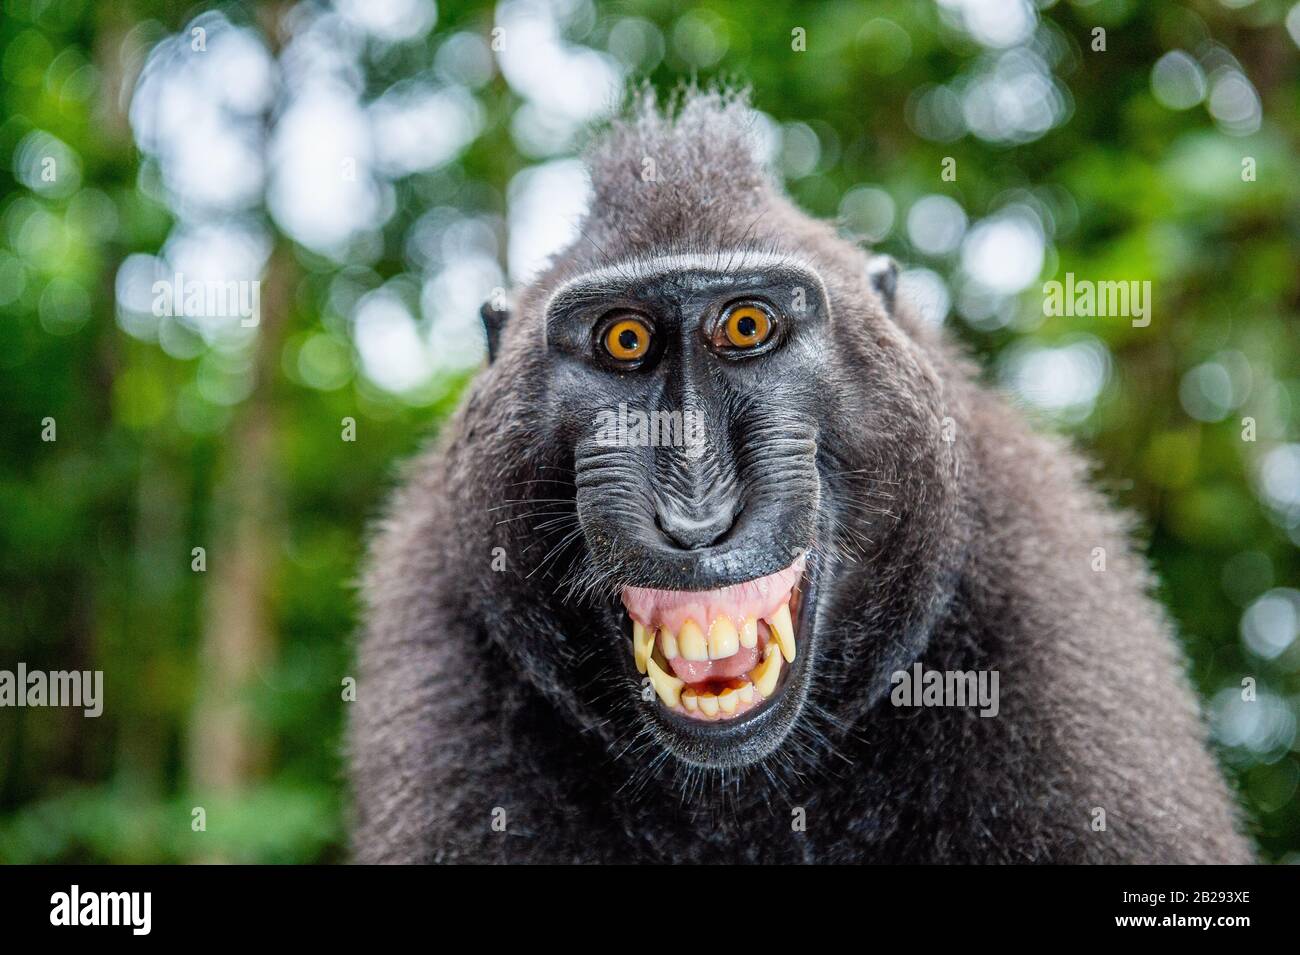 Celebes crested macaque with open mouth. Close up portrait on the green natural background. Crested black macaque, Sulawesi crested macaque, or black Stock Photo